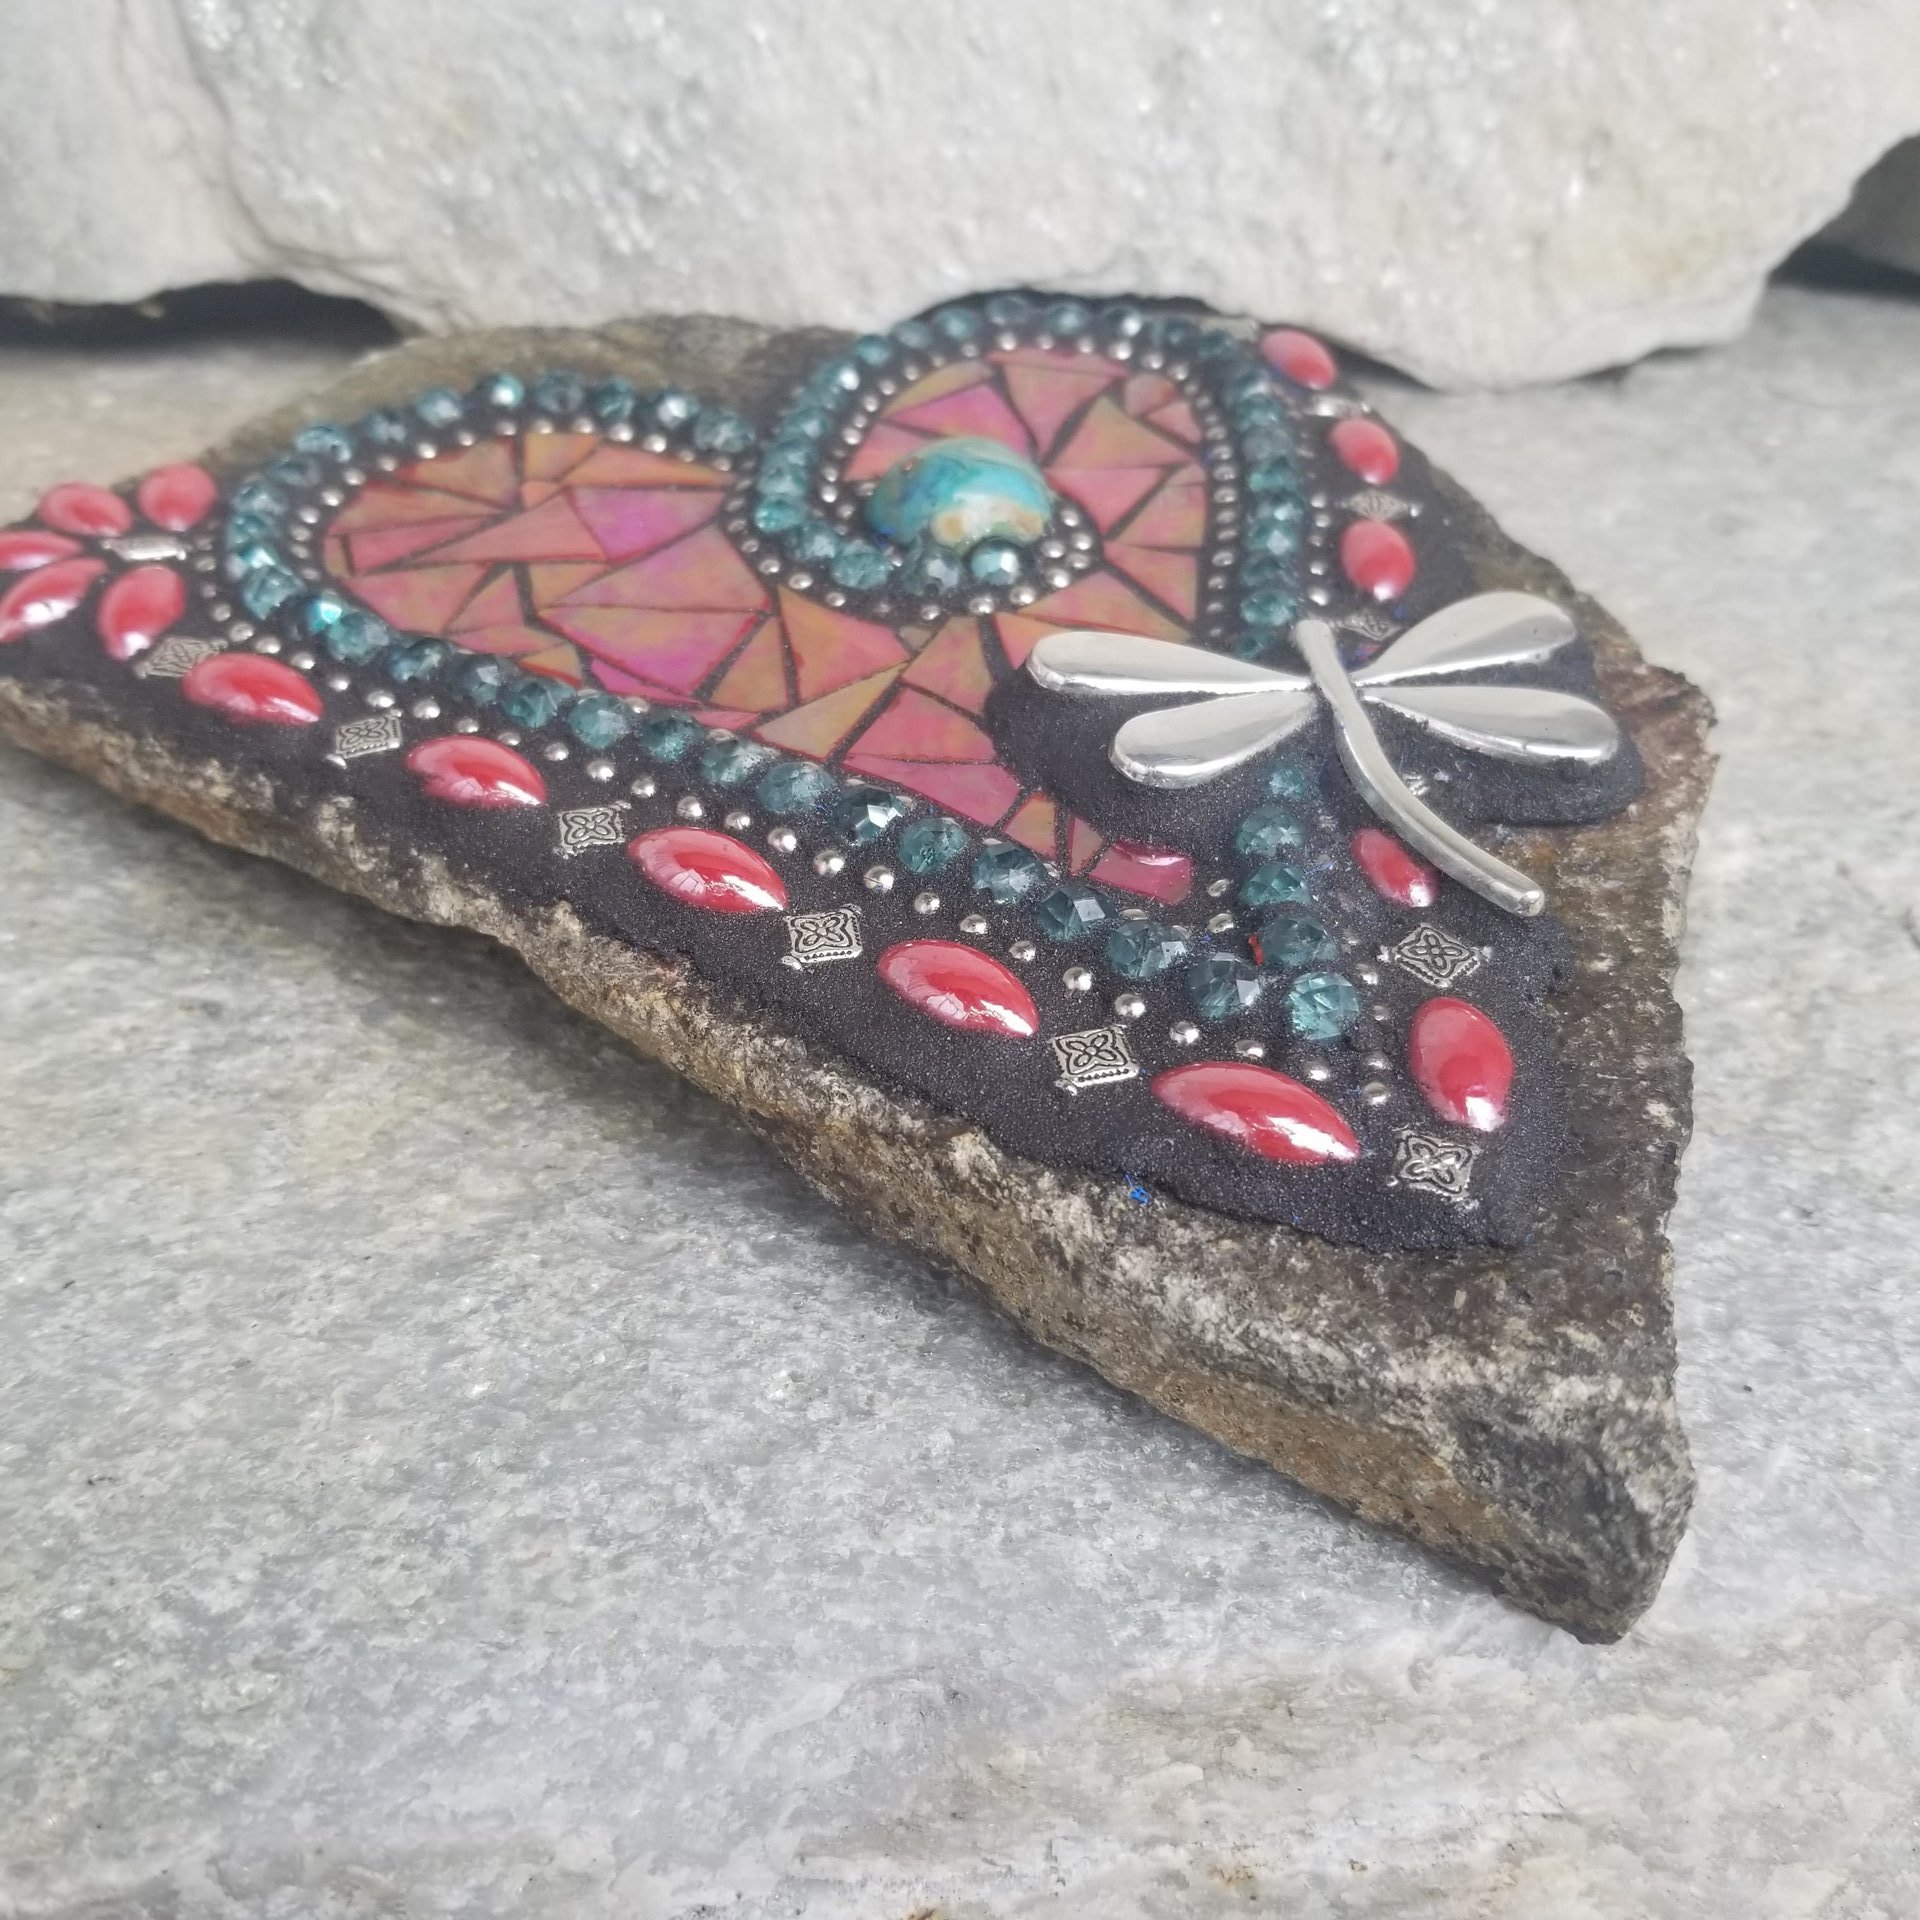 Iridescent Red Mosaic Heart Garden Stone with Dragonfly  